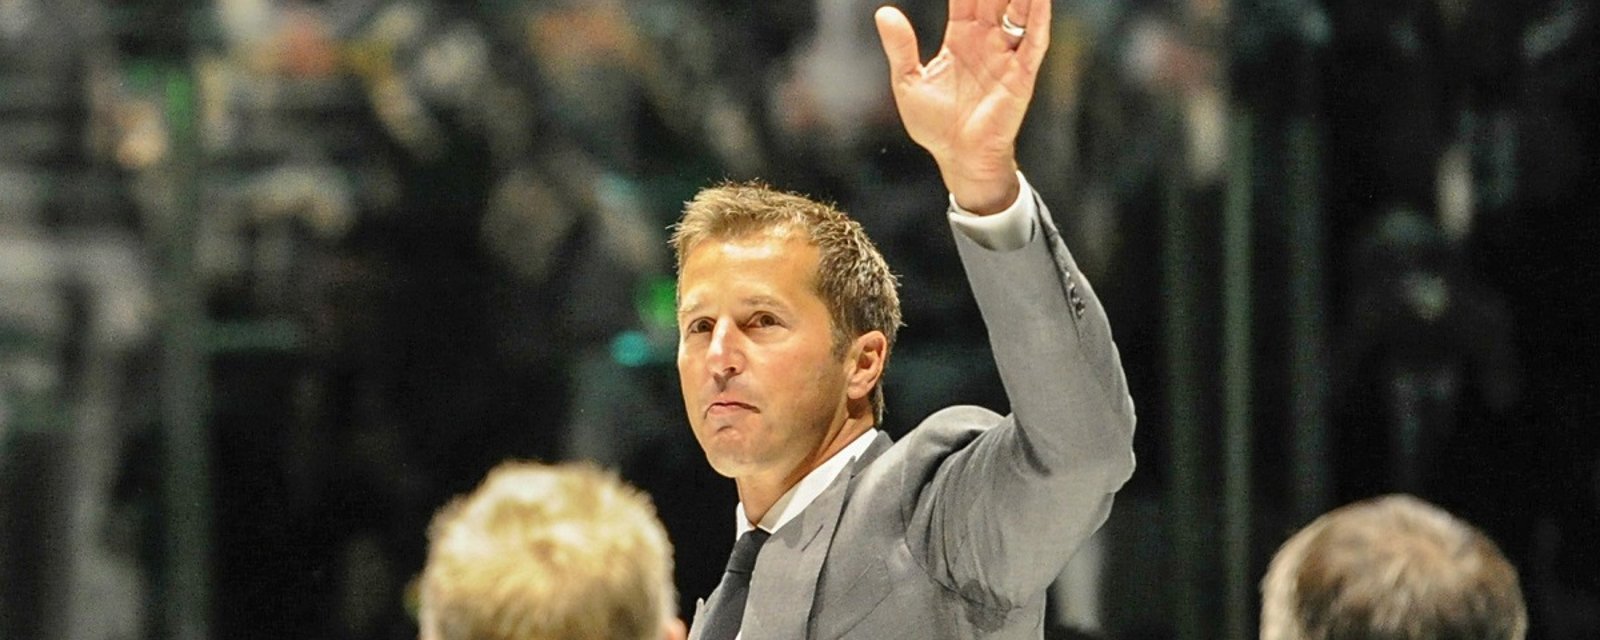 Rumor: Mike Modano set to make return to the NHL in very high profile role.